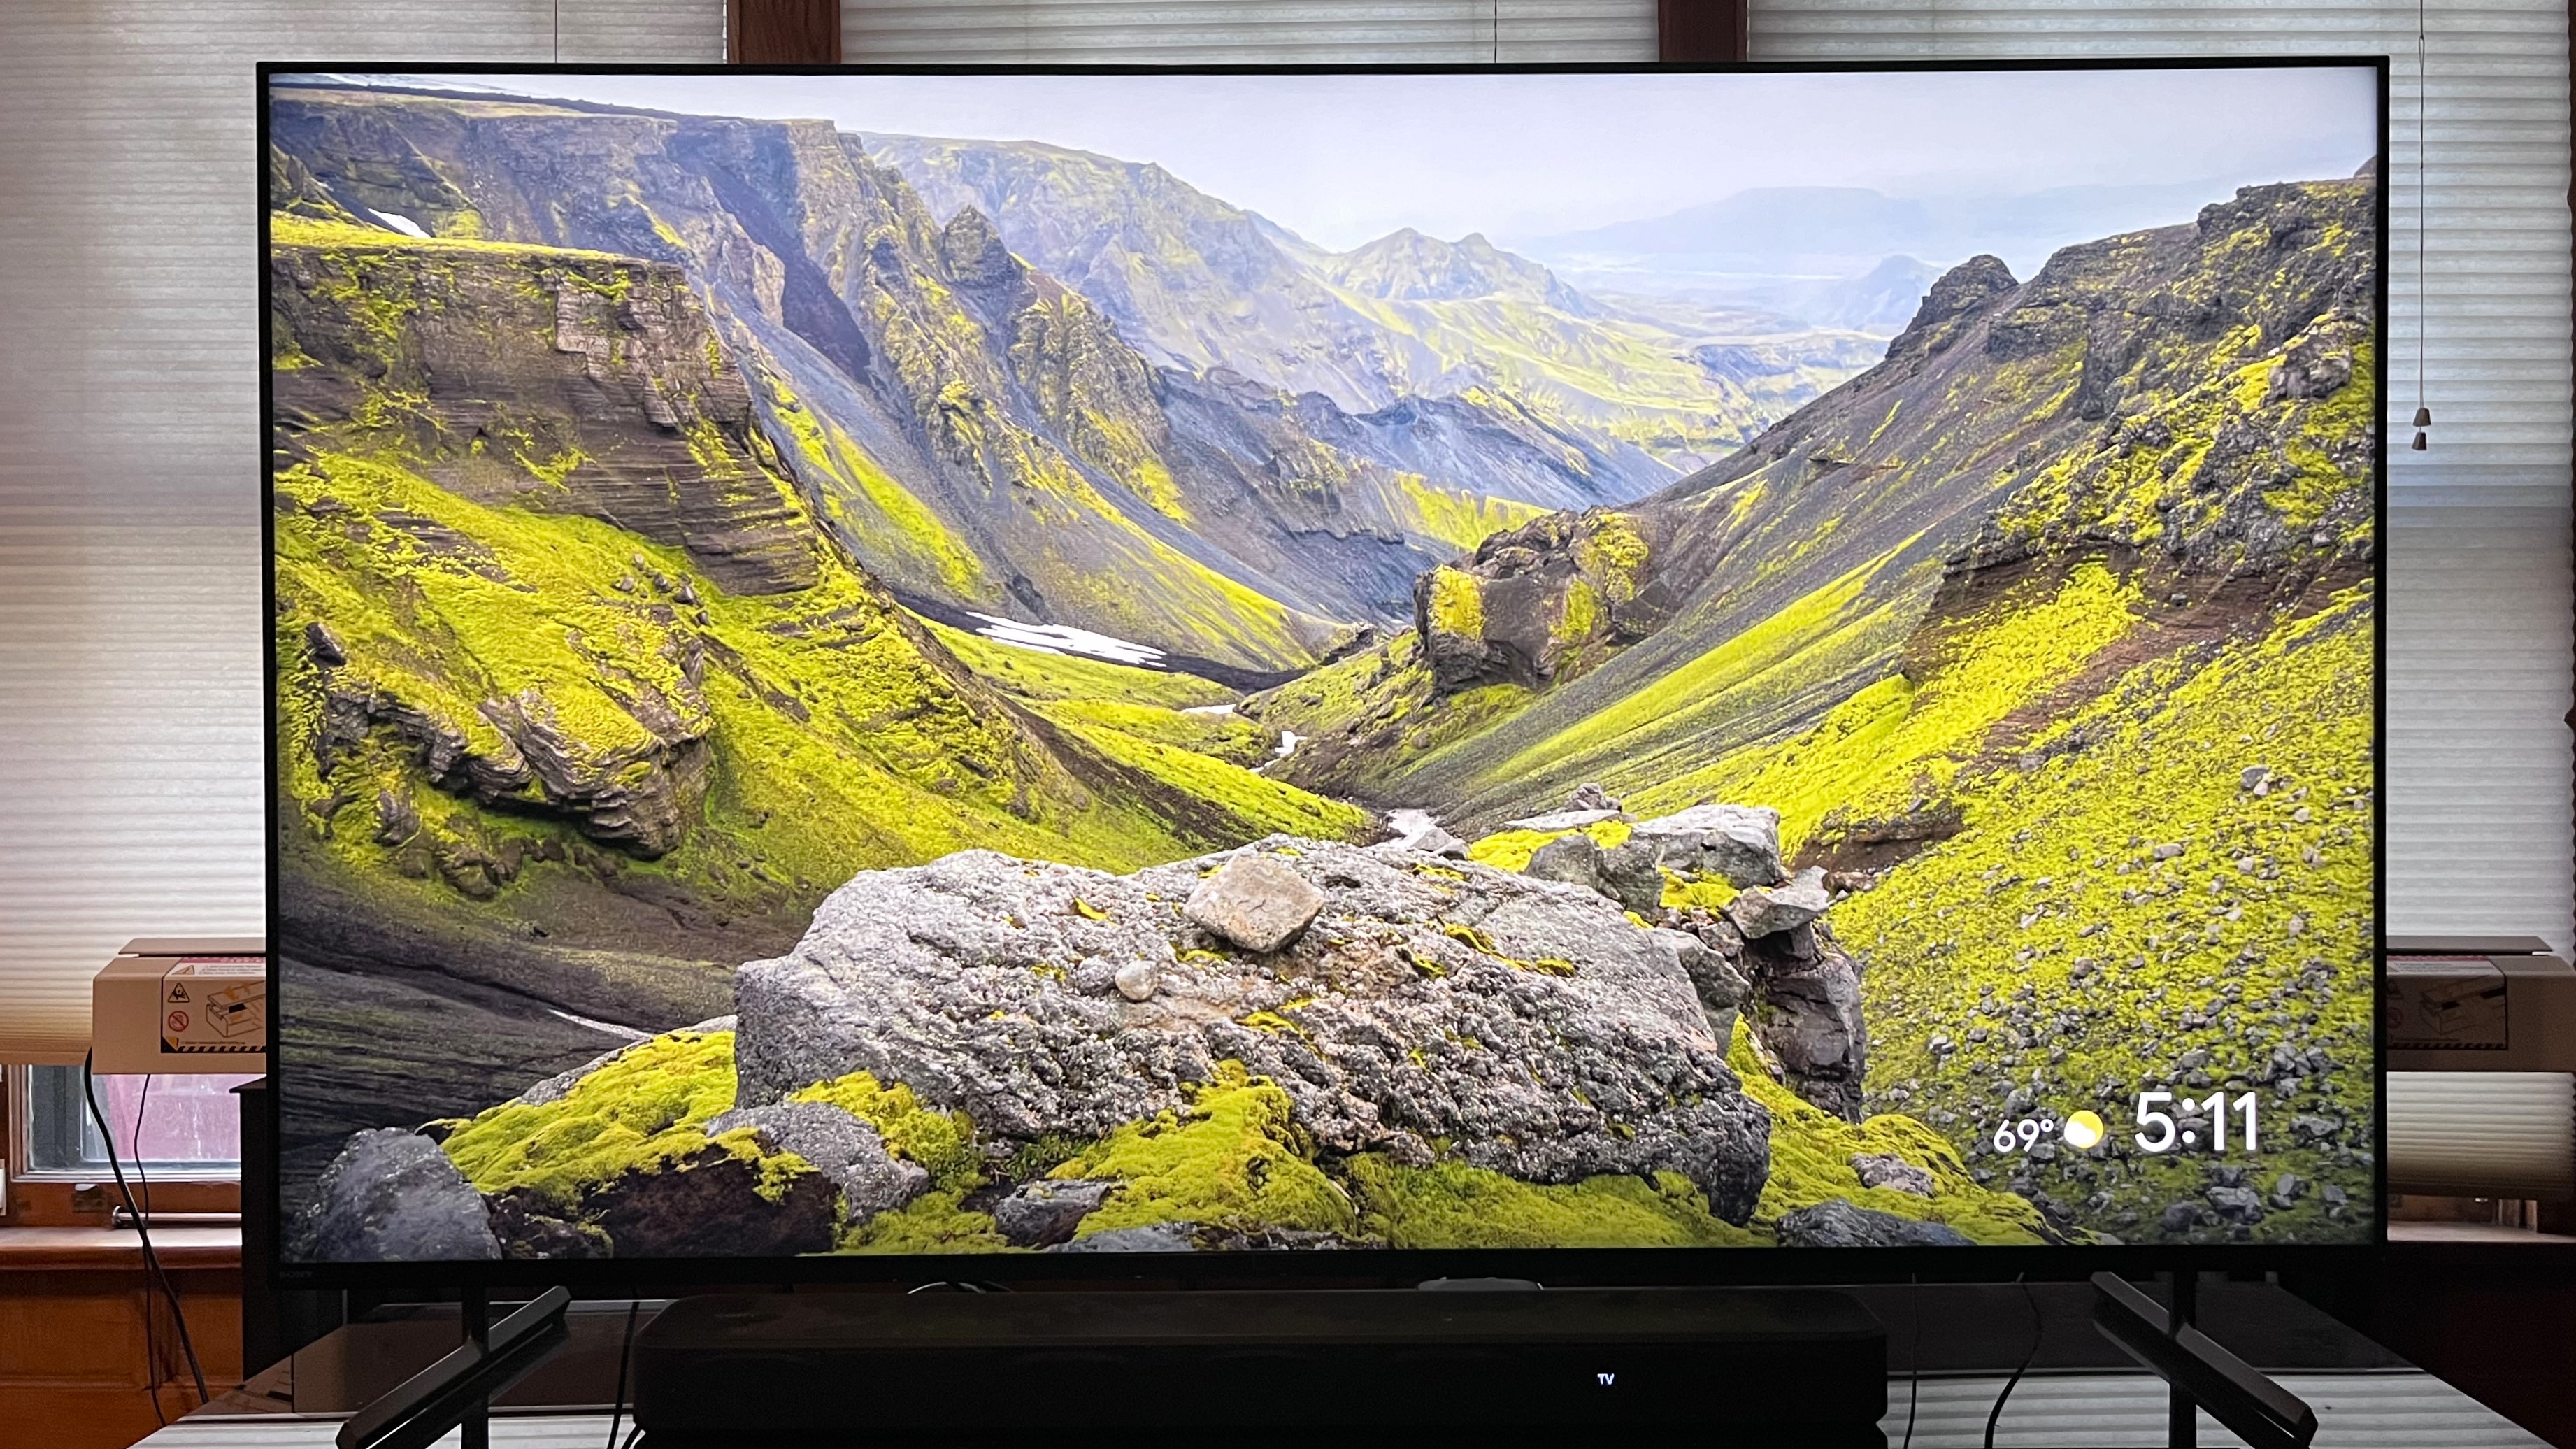 Sony X90L showing image of green valley on screen